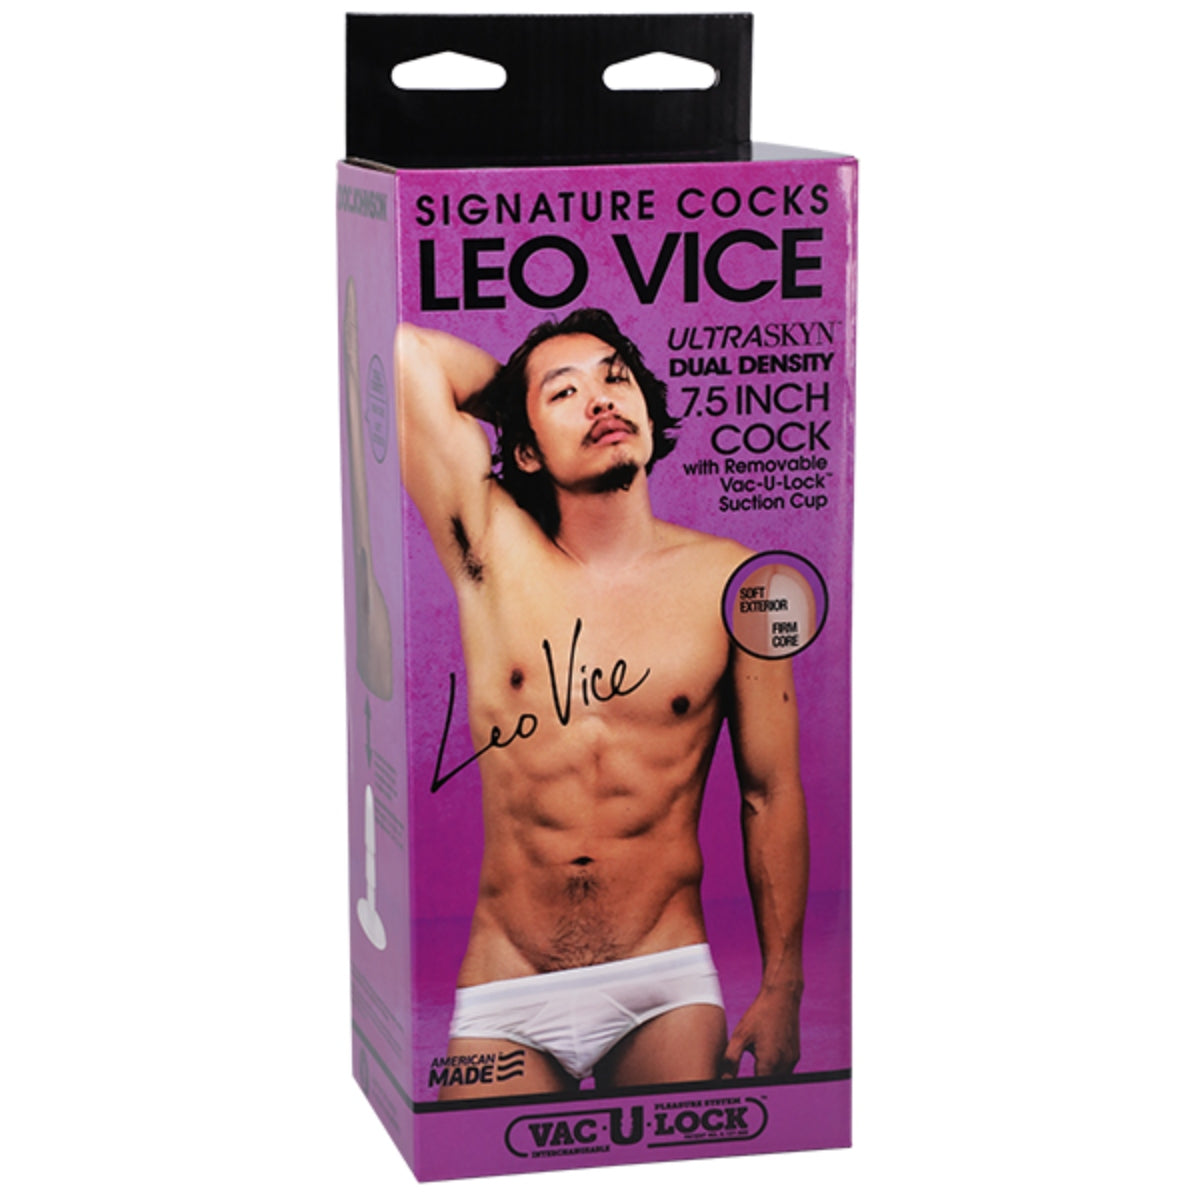 Signature Cocks Leo Vice 6 Inch Ultraskyn Cock with Removable Vac-U-Lock Suction Cup